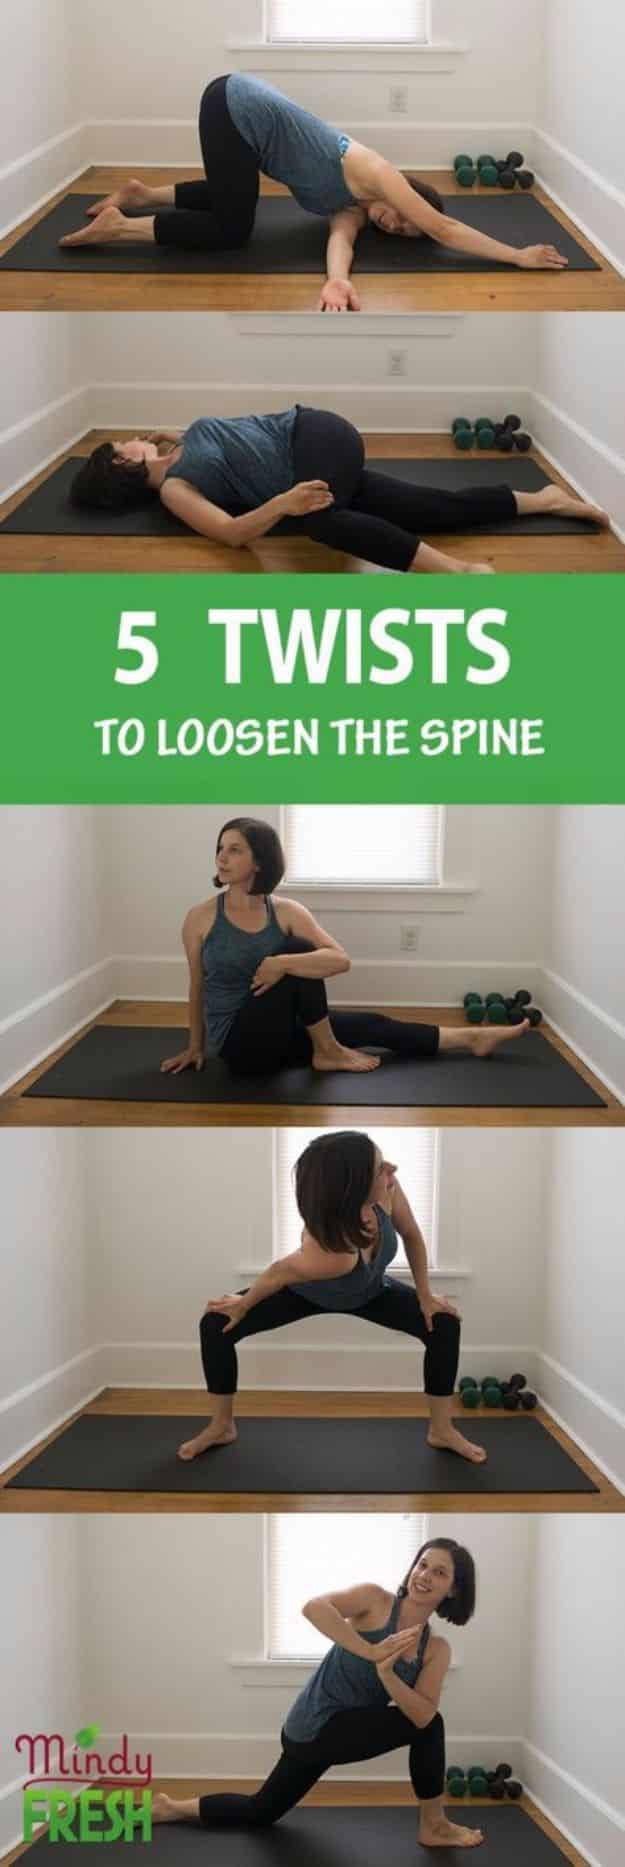 Best Exercises for 2018 - Twists To Loosen The Spine - Easy At Home Exercises - Quick Exercise Tutorials to Try at Lunch Break - Ways To Get In Shape - Butt, Abs, Arms, Legs, Thighs, Tummy http://diyjoy.com/best-at-home-exercises-2018